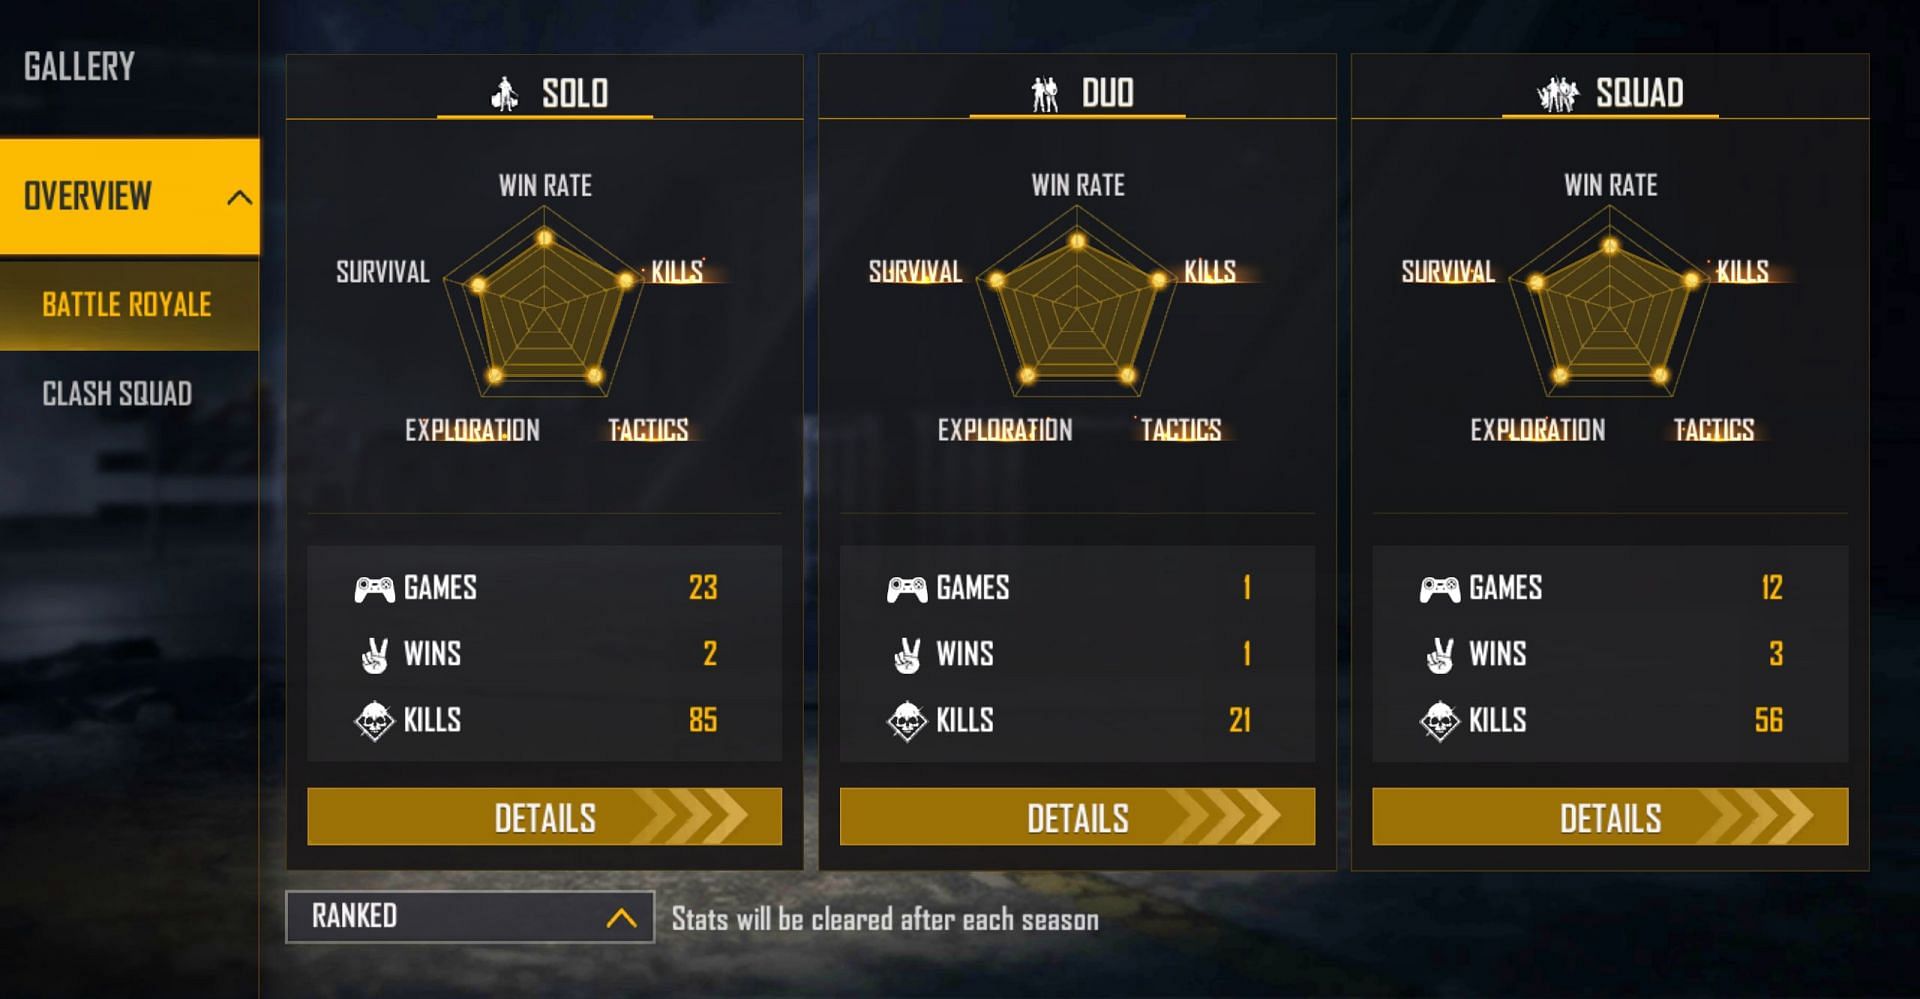 Nobru has 100% success in the duo games (Image via Free Fire)